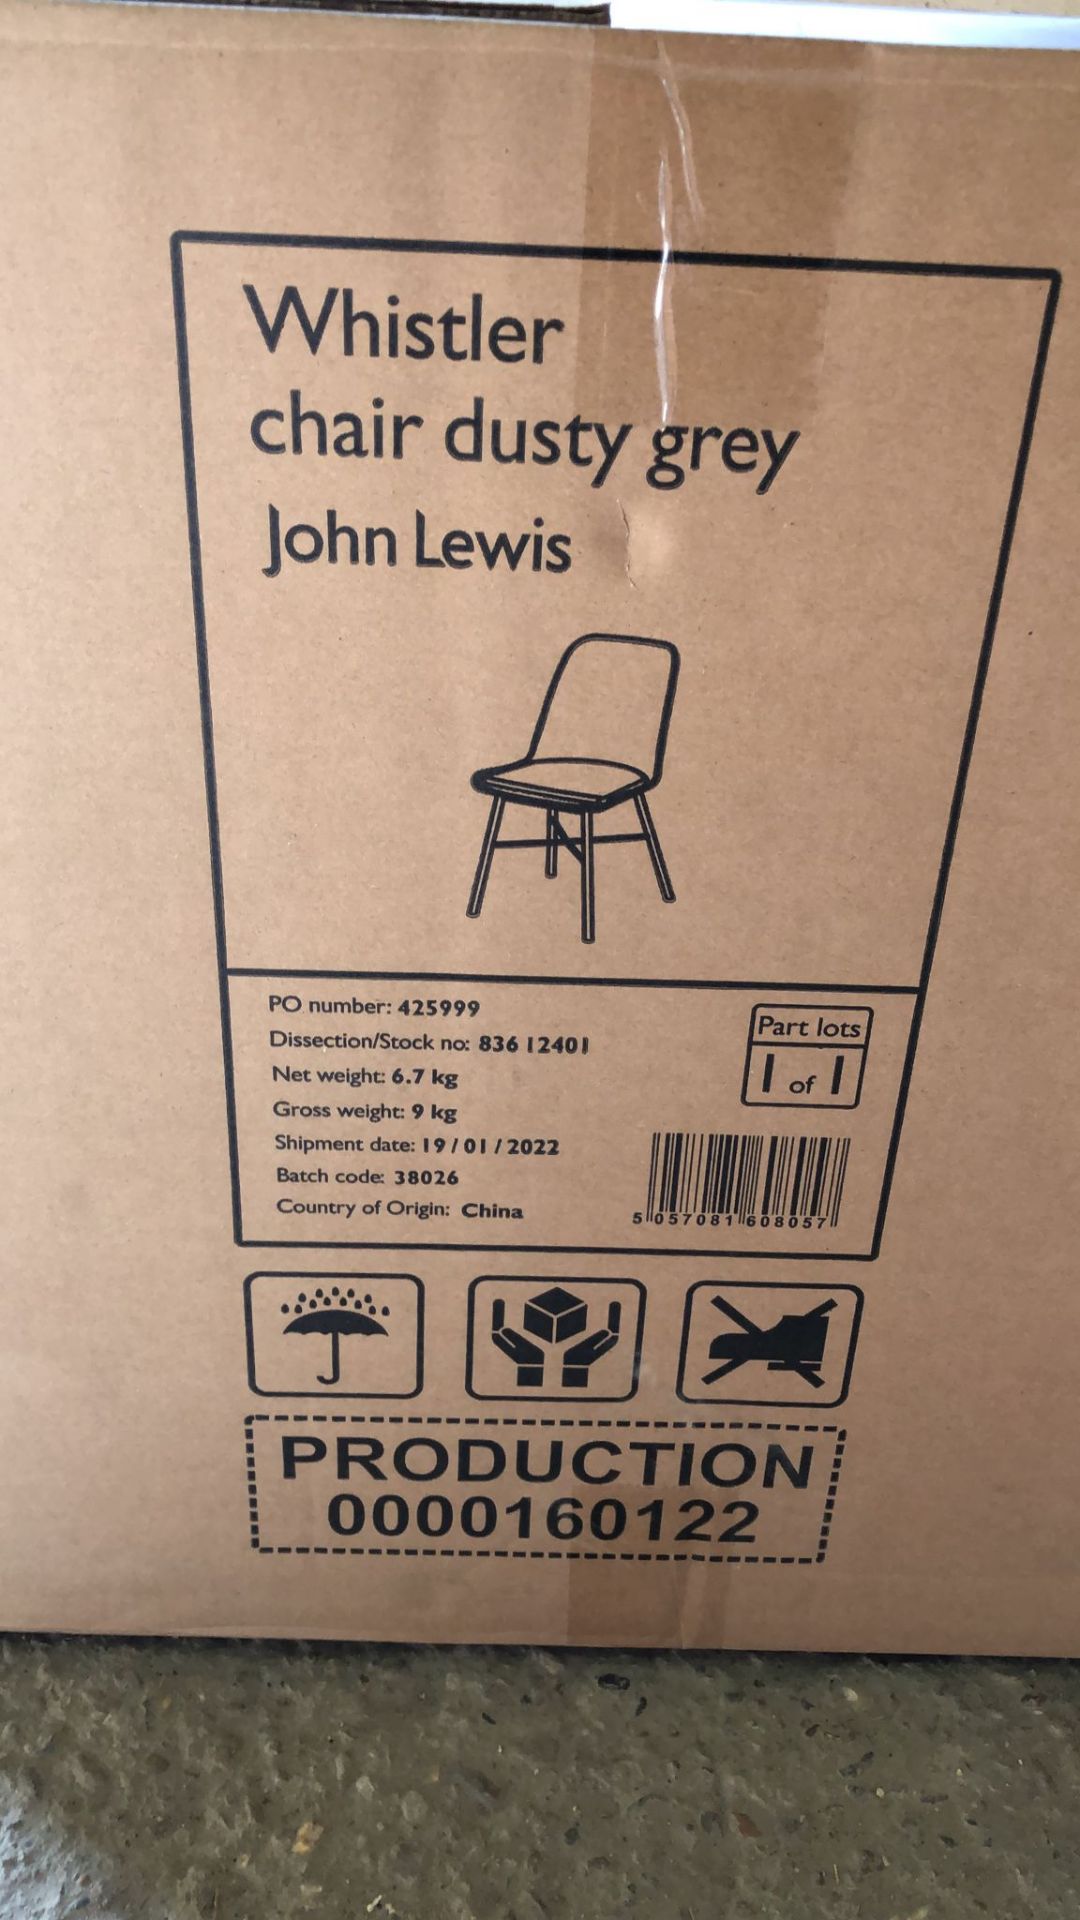 John Lewis ANYDAY Whistler Dining Chair, Dusty Grey RRP £99 - Image 2 of 2